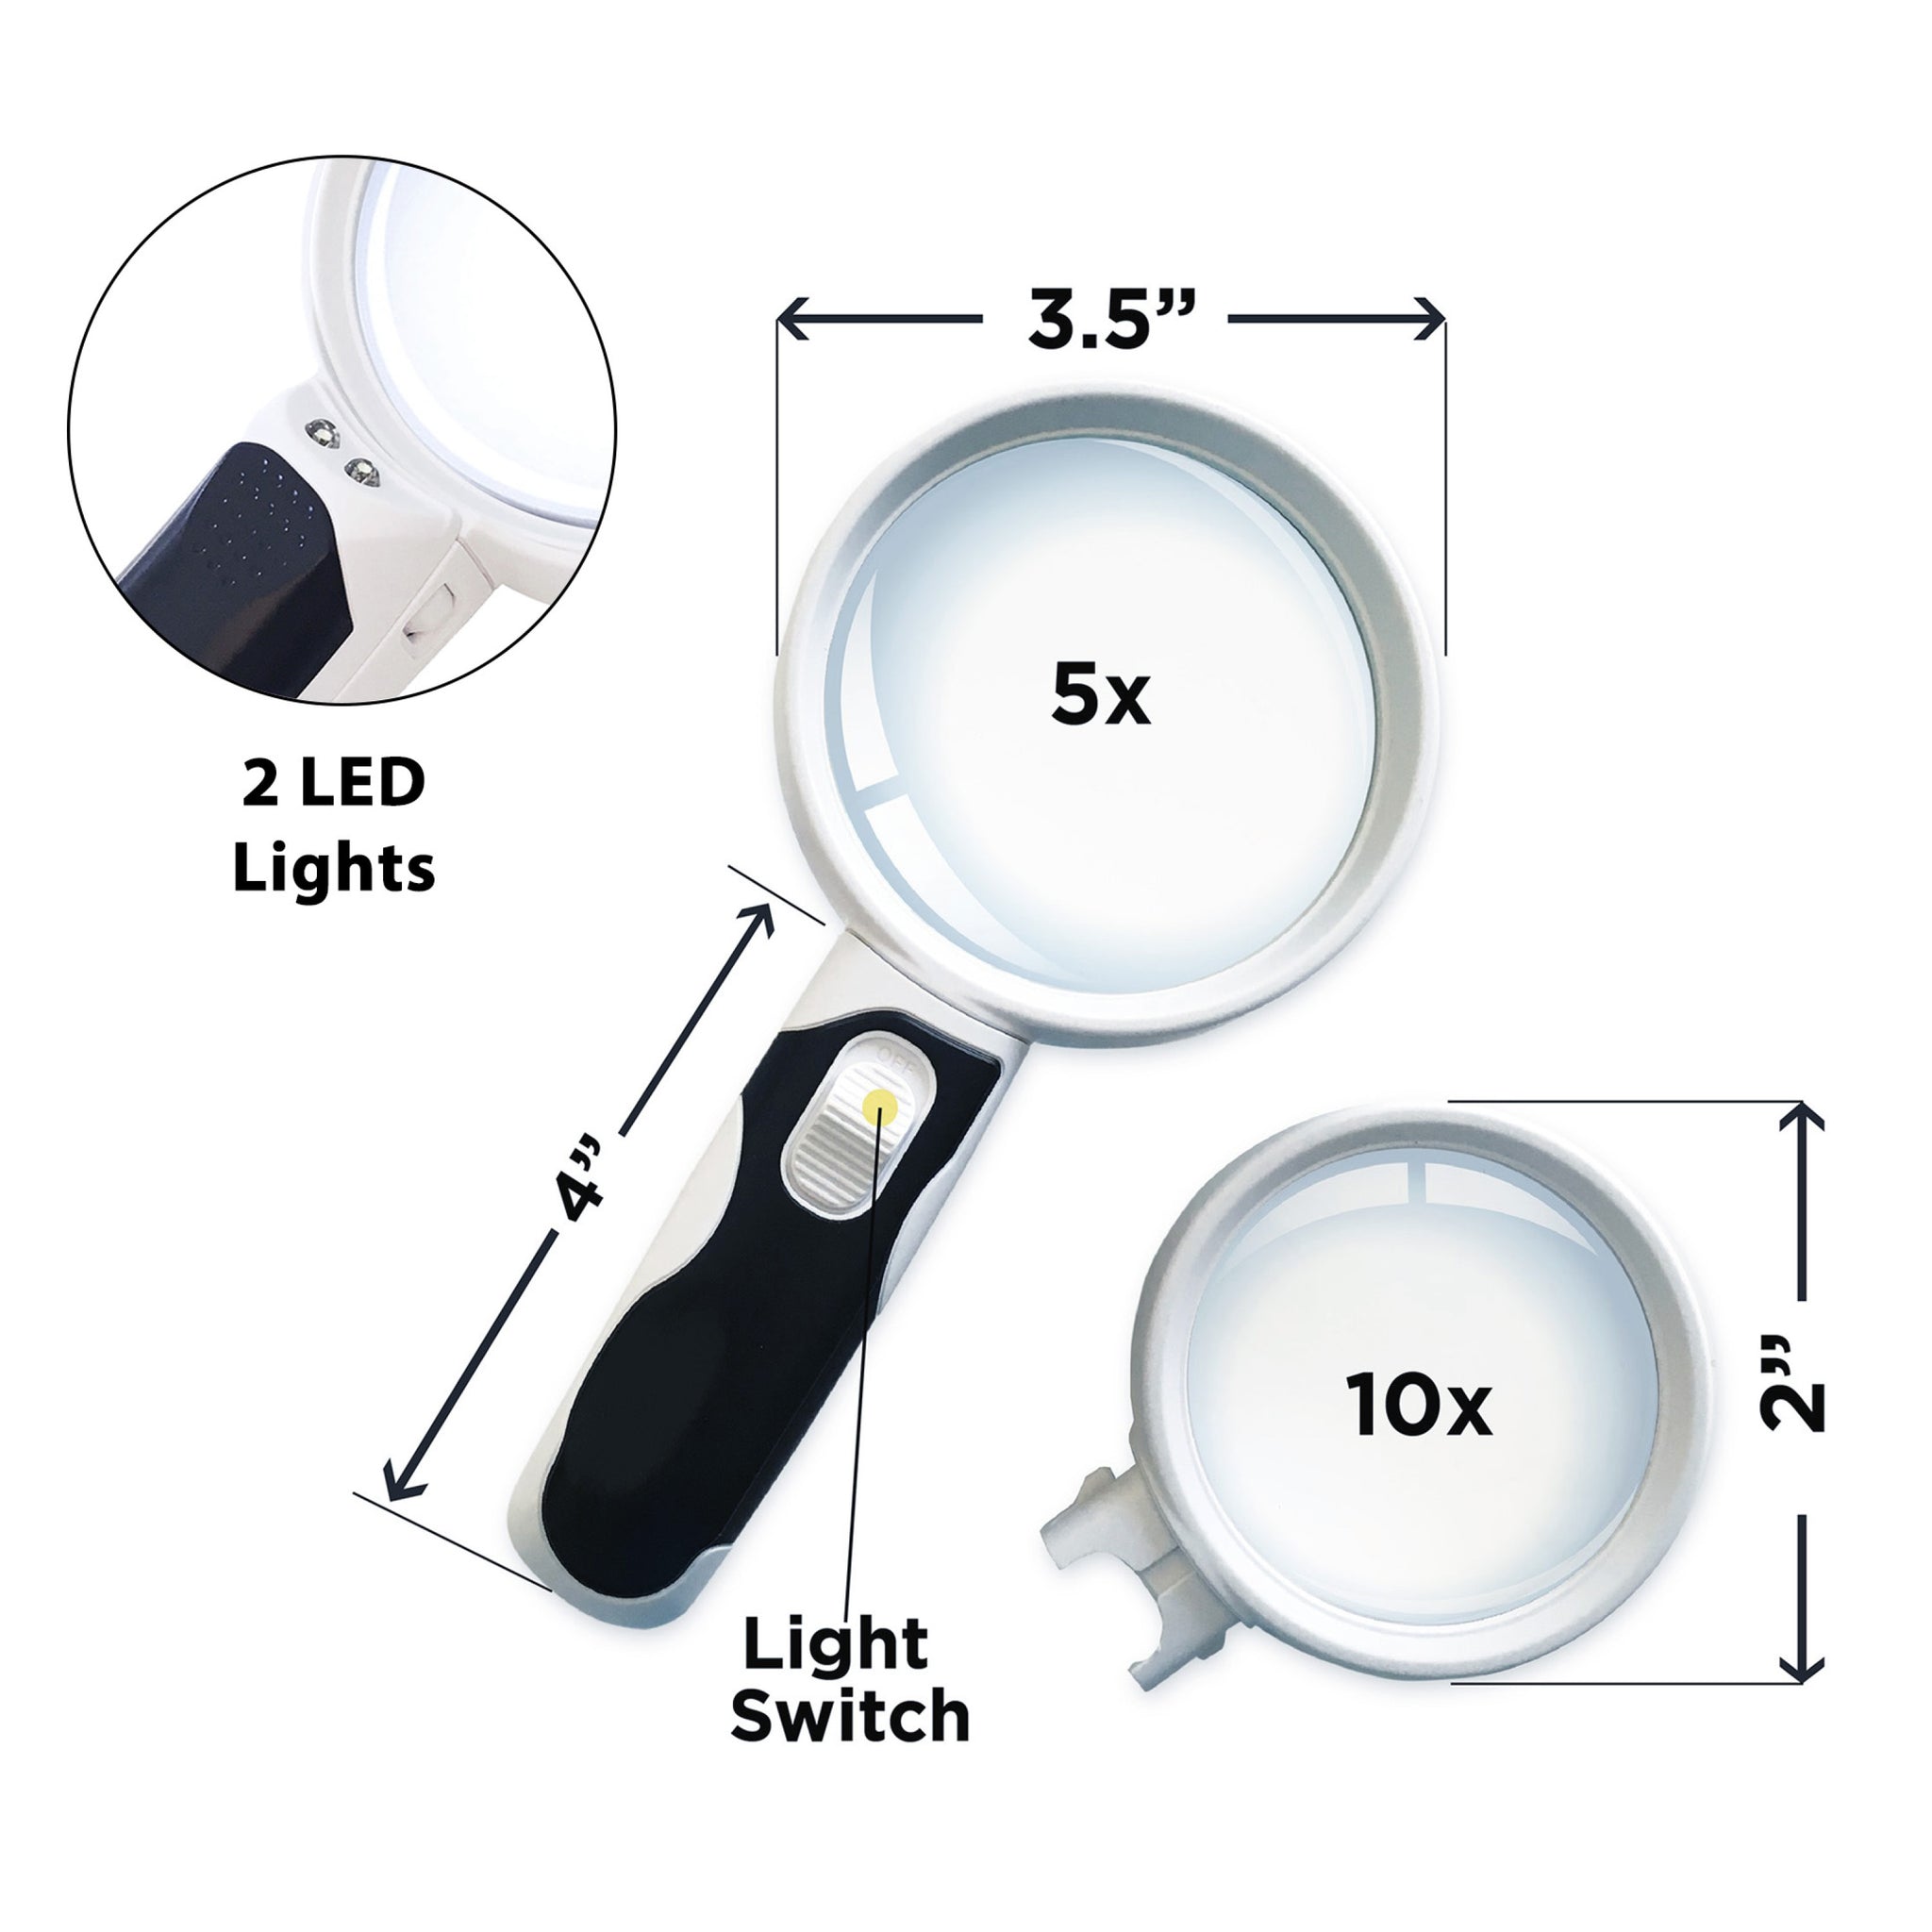 Magnifying Goggles Glass, 2 LED Lights, 5 Glass, Magnifier, and Adjustable  Work at Rs 400, Magnifying Lenses in Surat